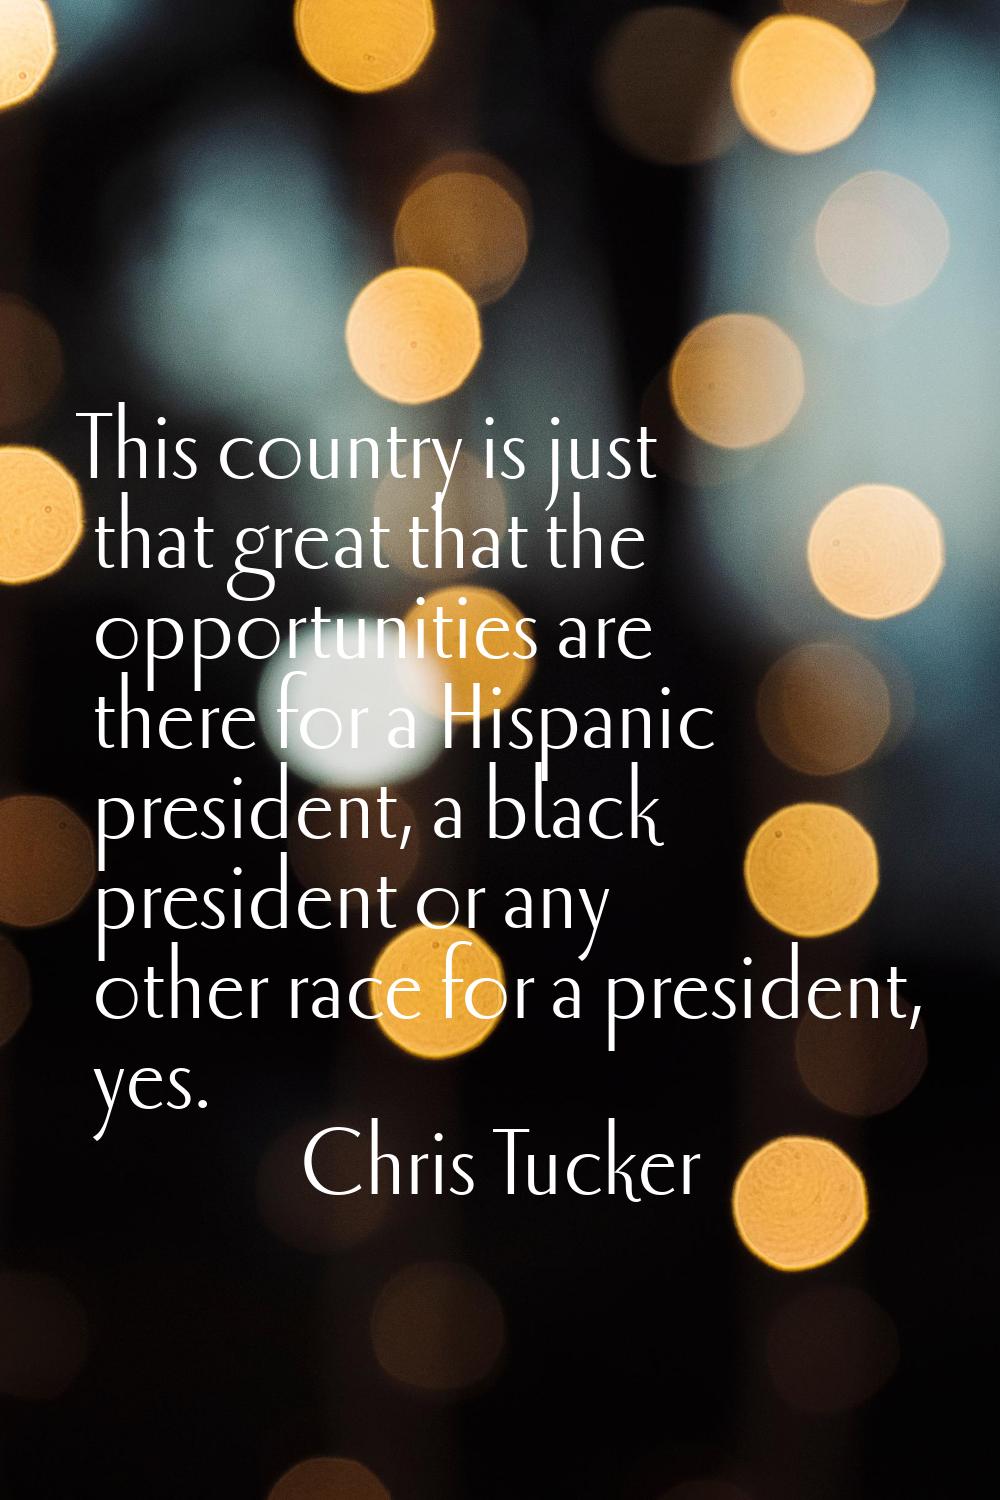 This country is just that great that the opportunities are there for a Hispanic president, a black 